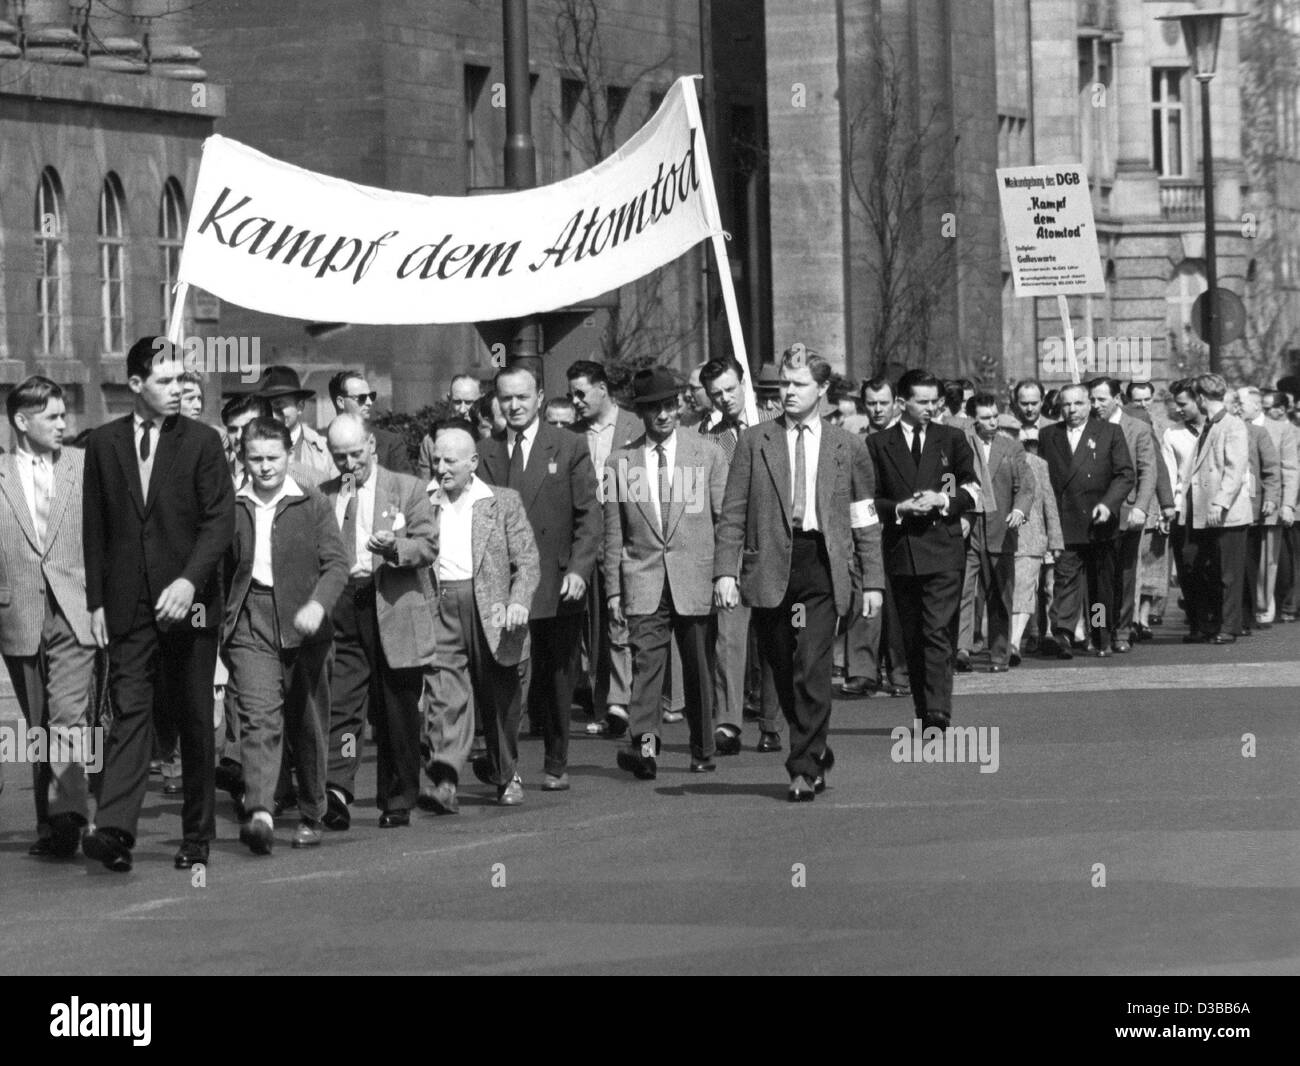 (dpa files) - A group of demonstrators carry a banner reading 'Kampf dem Atomtod' (fight nuclear death) during a rally on Labour Day in Frankfurt, West Germany, 1 May 1958. Under this motto citizens in several German cities protested against the government acceptance of NATO plans to equip the West  Stock Photo